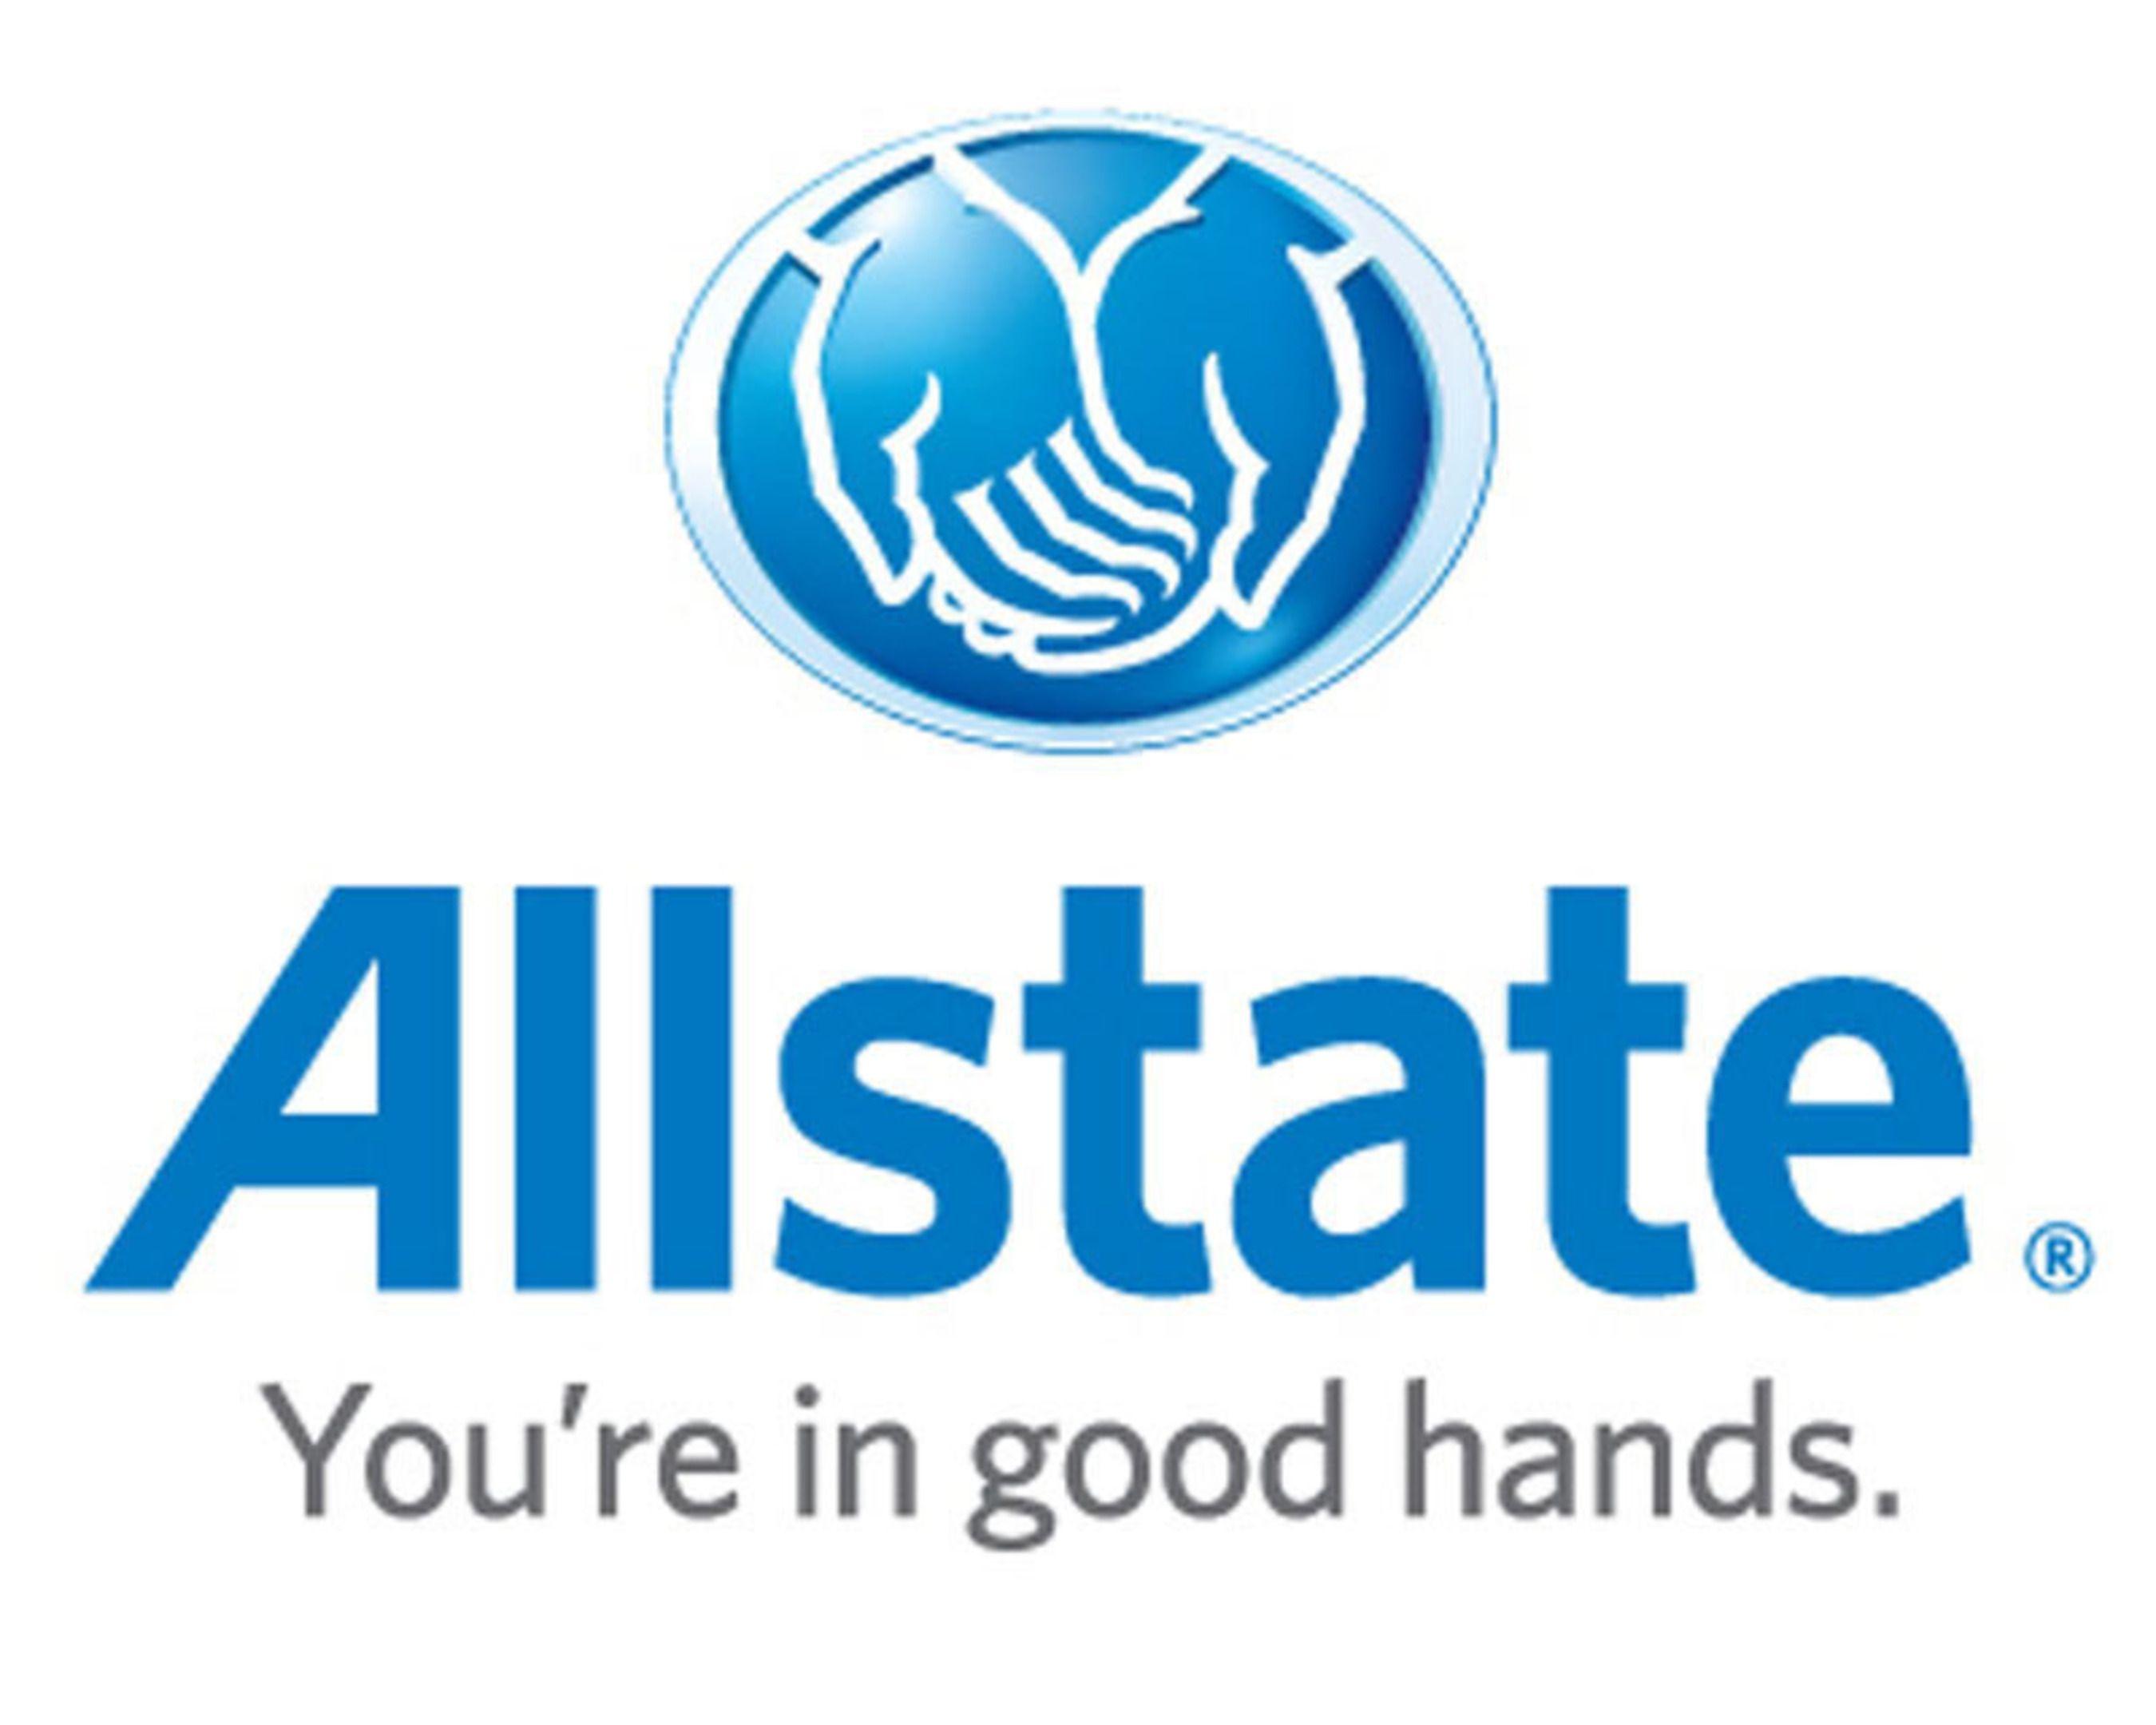 Allstate Logo - Allstate Teams up with Country Music Star Frankie Ballard to